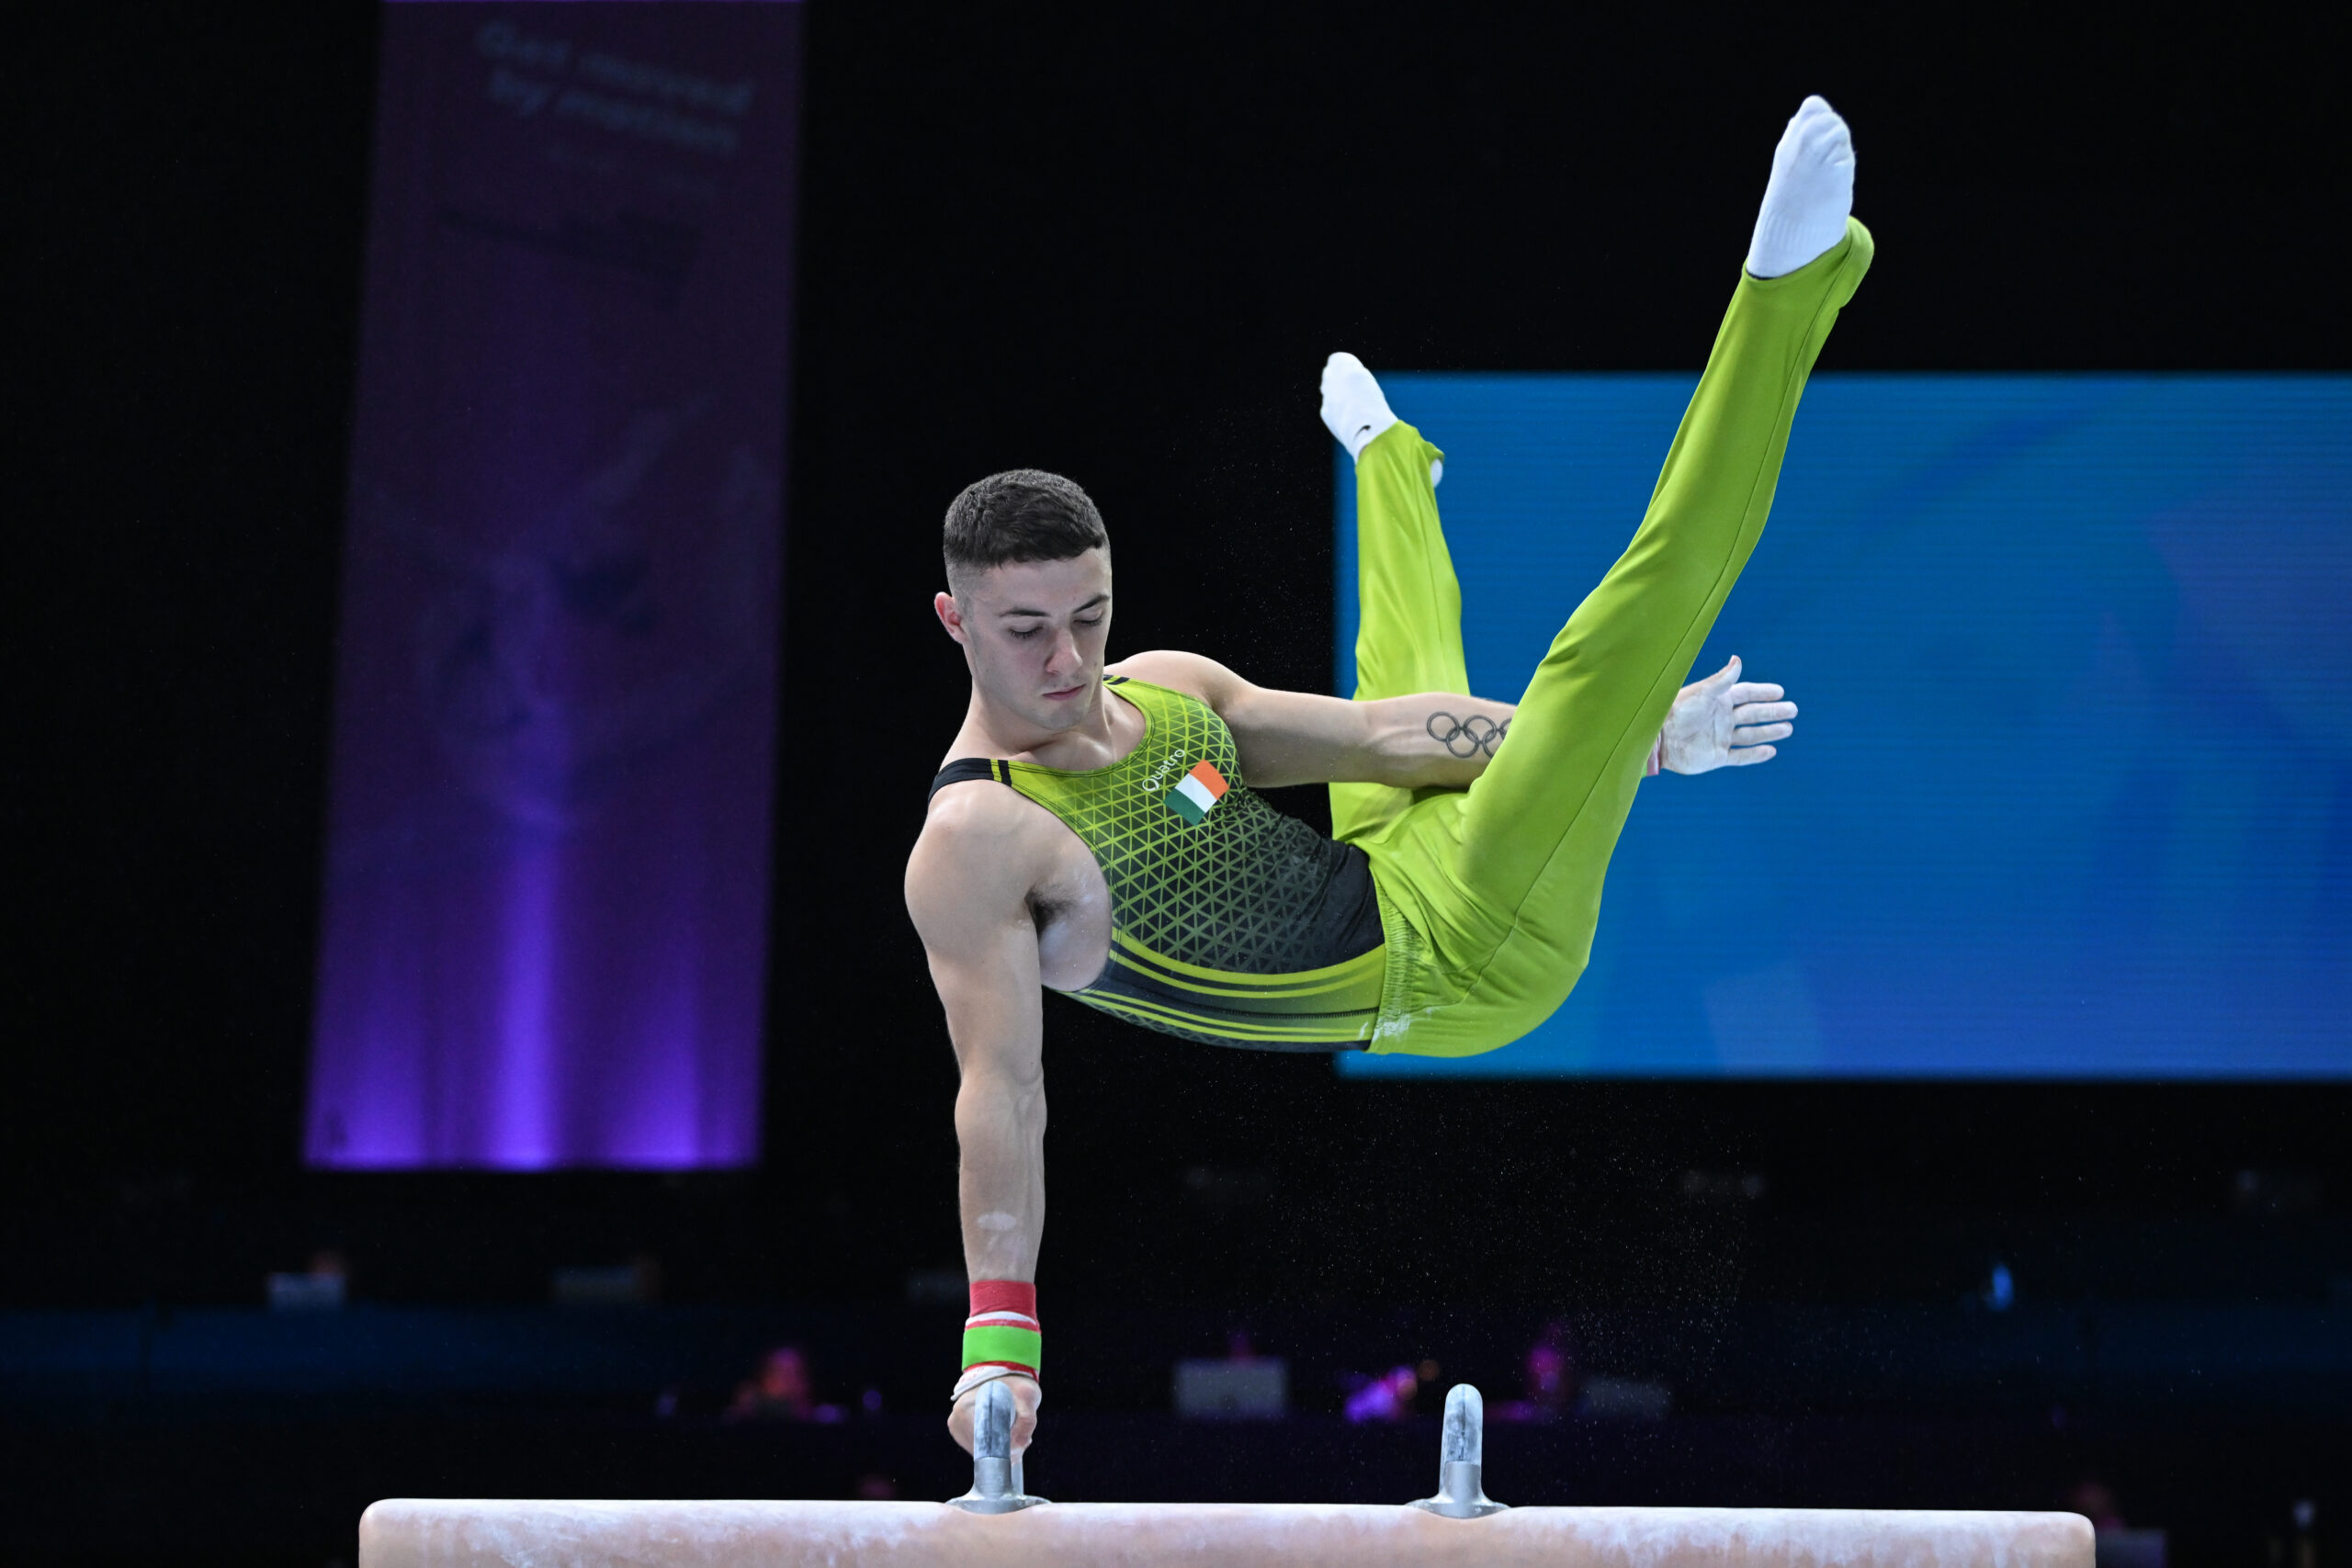 2023 World Championships Preview! - GymCastic